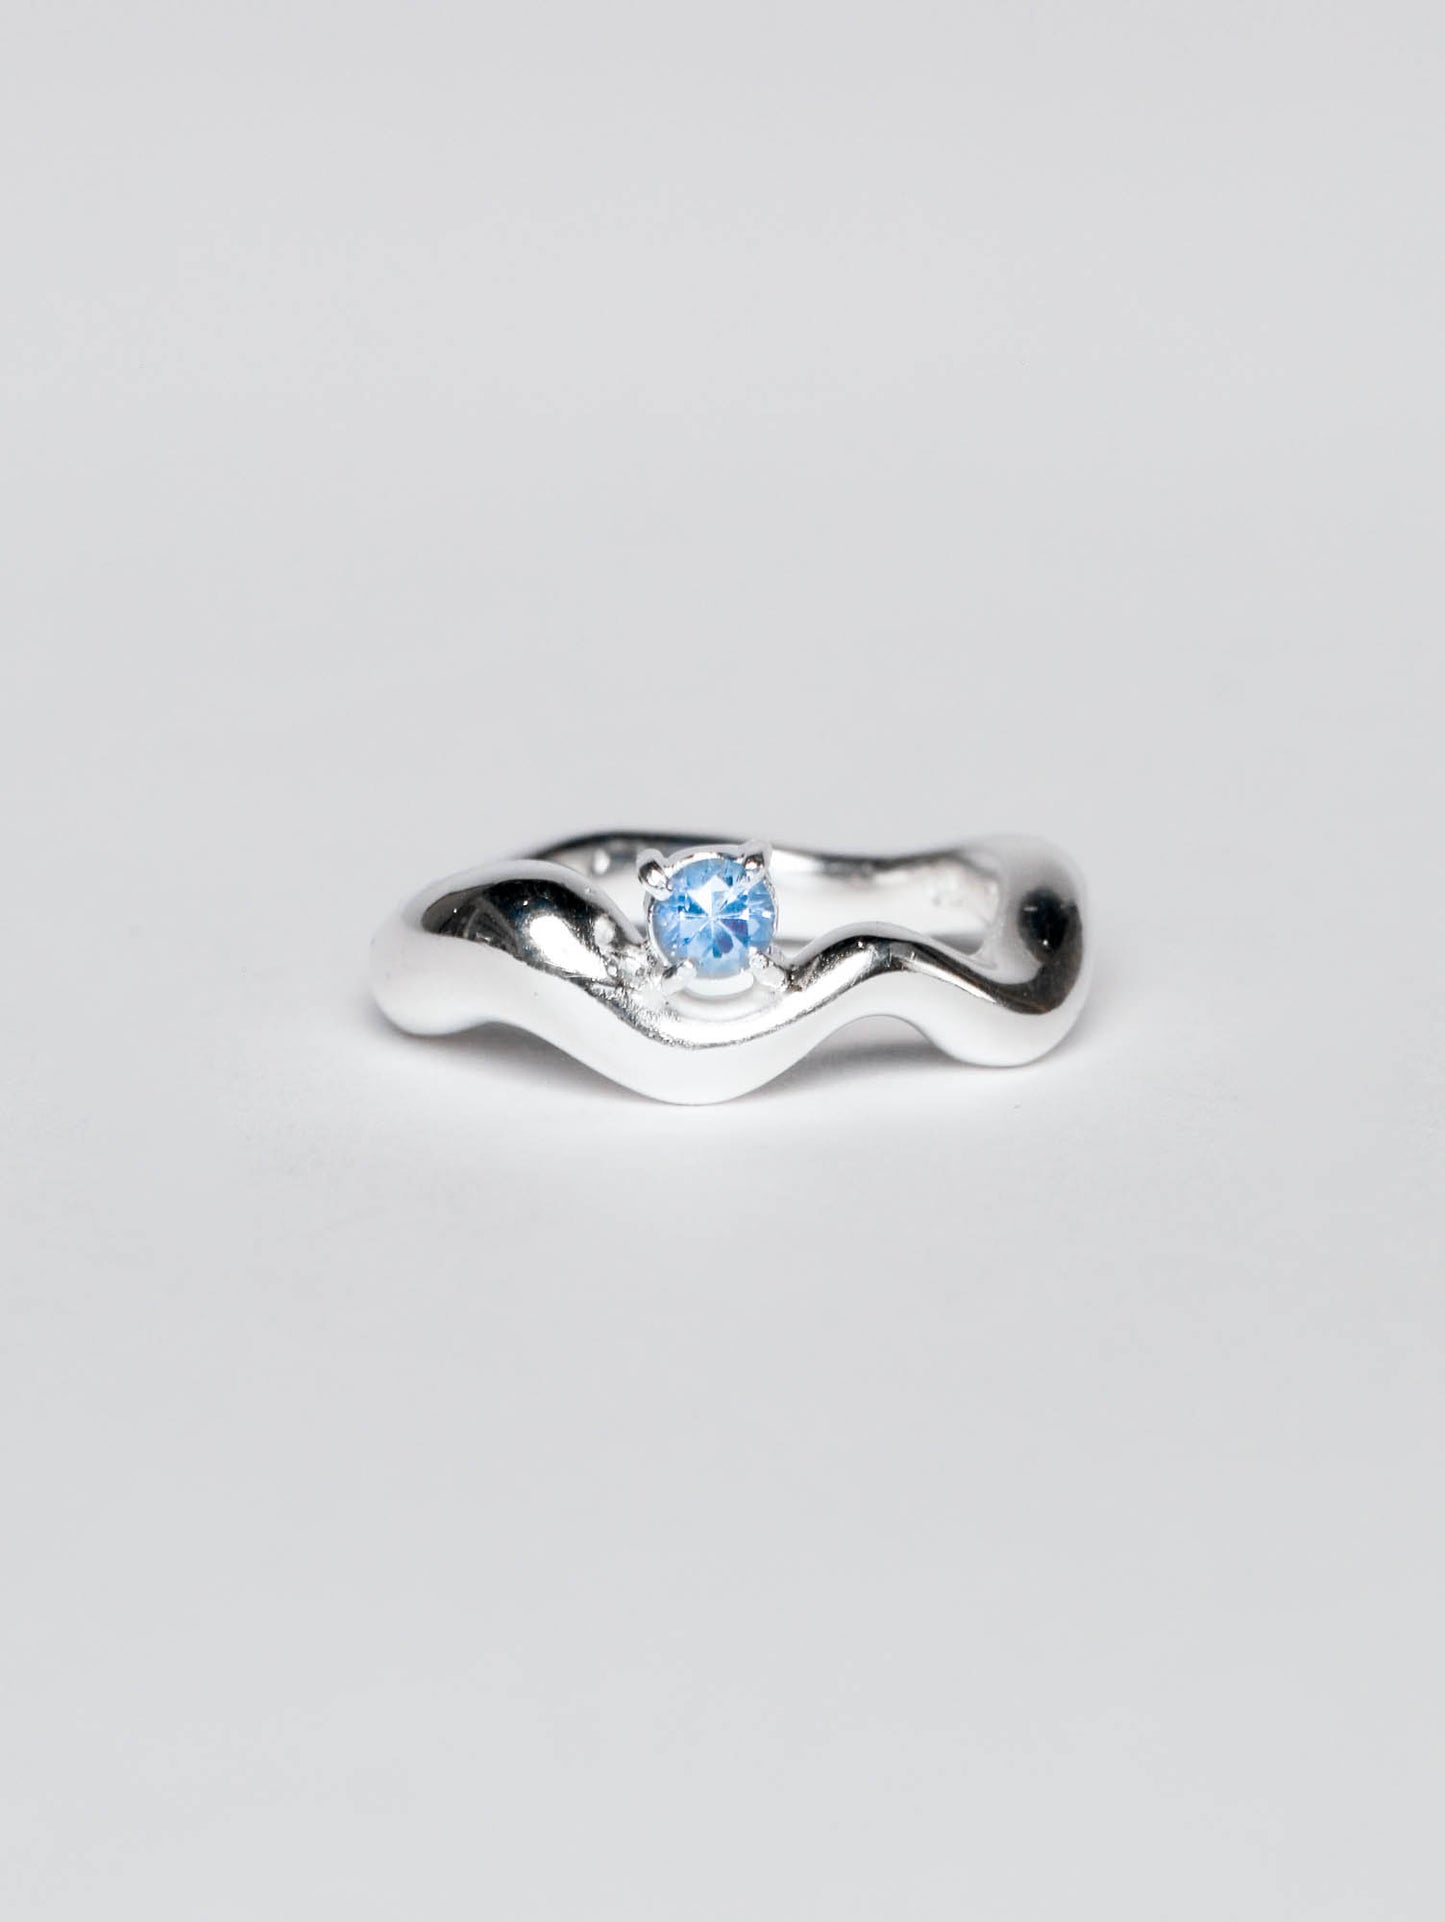 Wave Ring Silver with single Sapphire Stone # 4 | Size 8